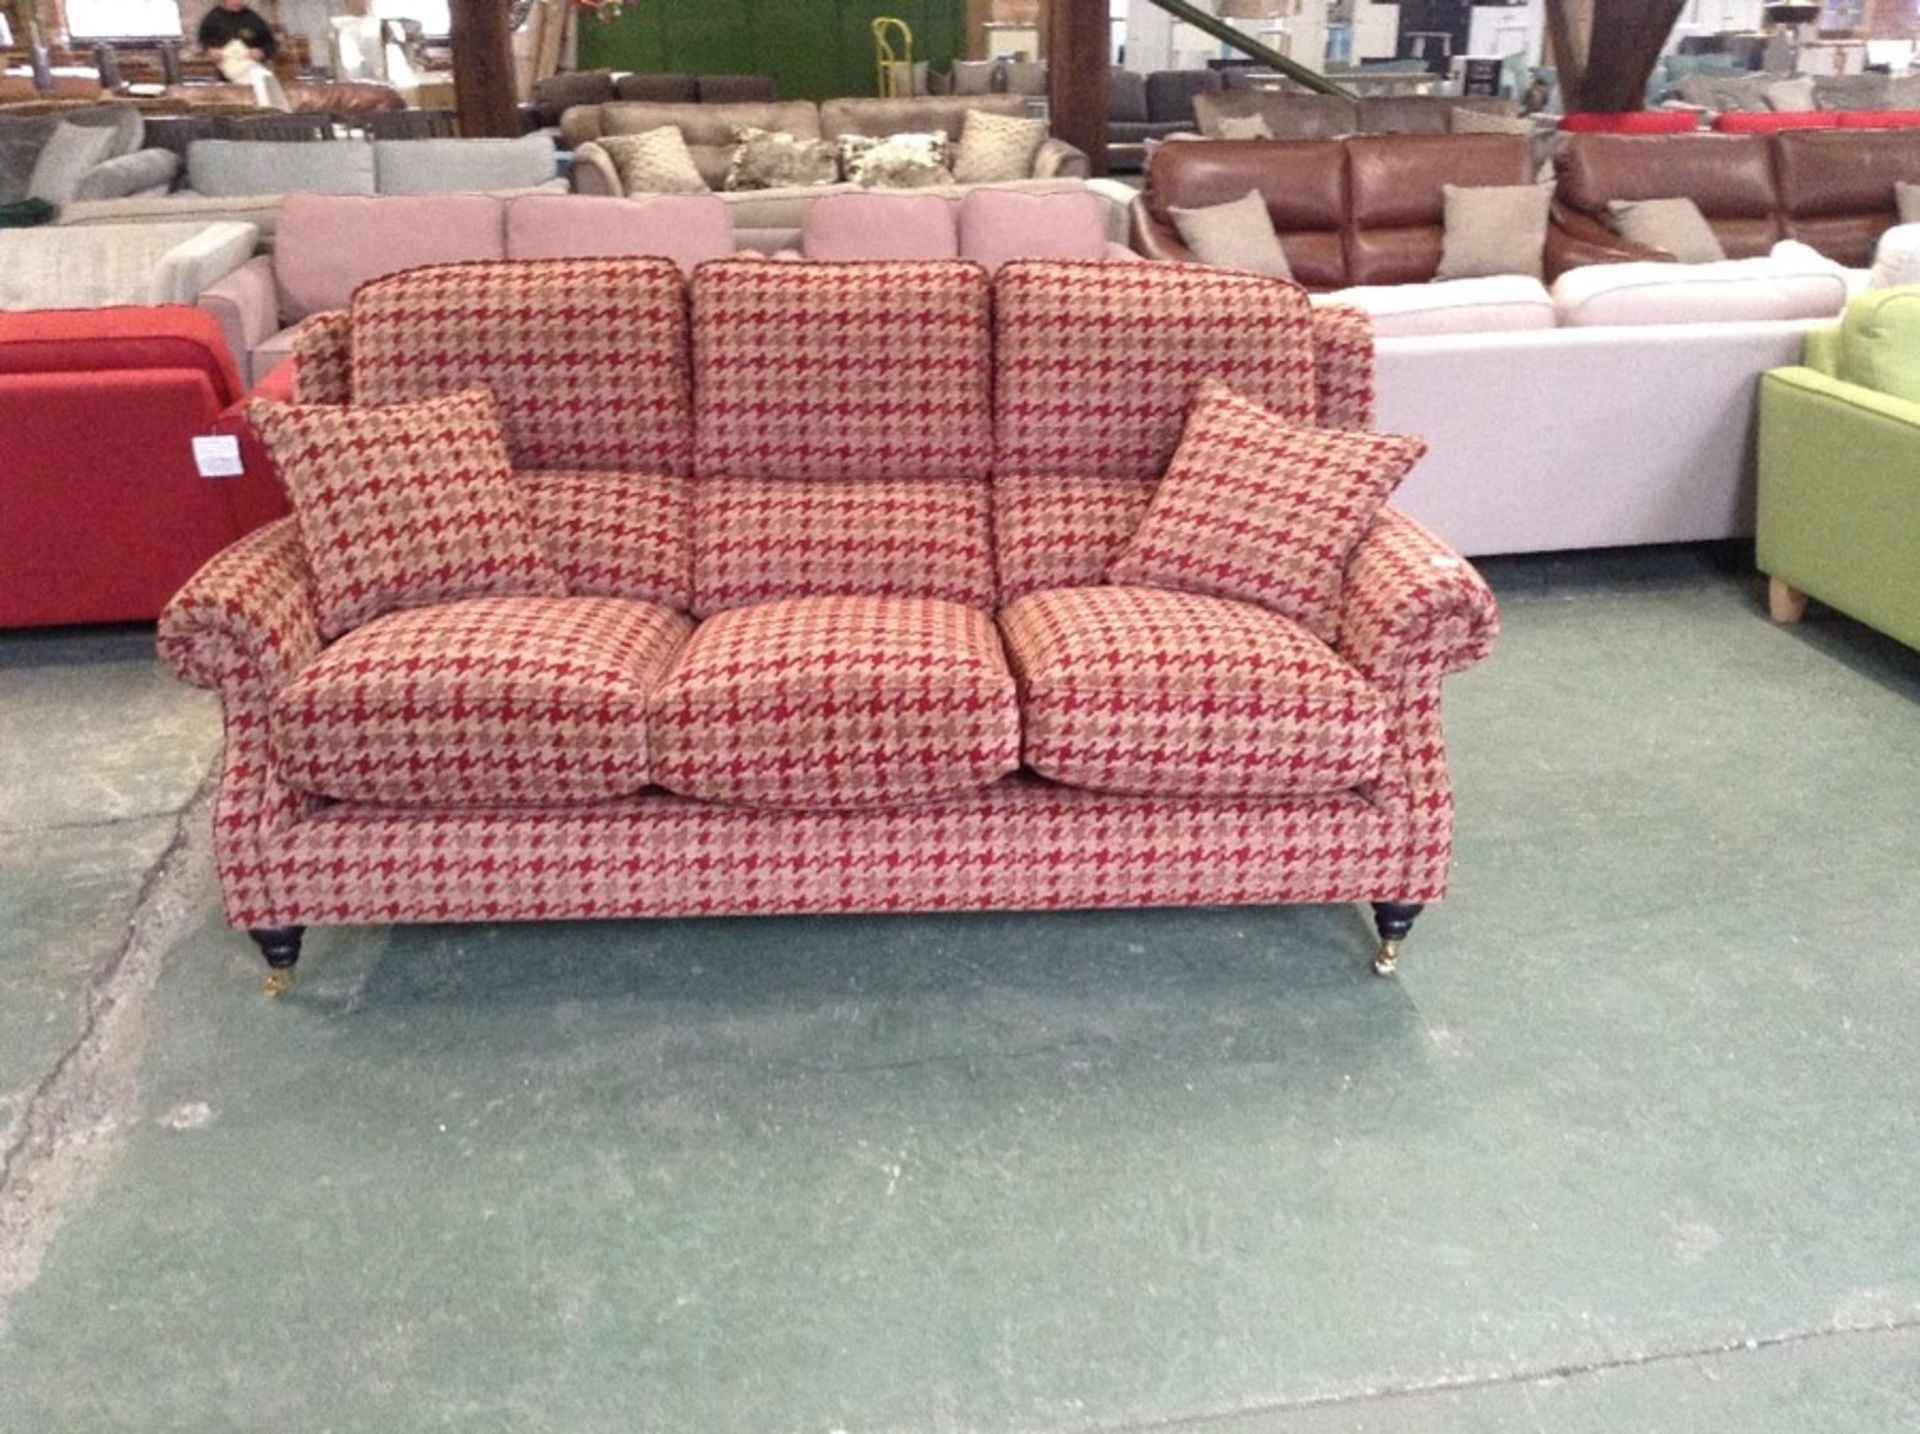 RED AND BEIGE PATTERNED HIGH BACK 3 SEATER SOFA (T